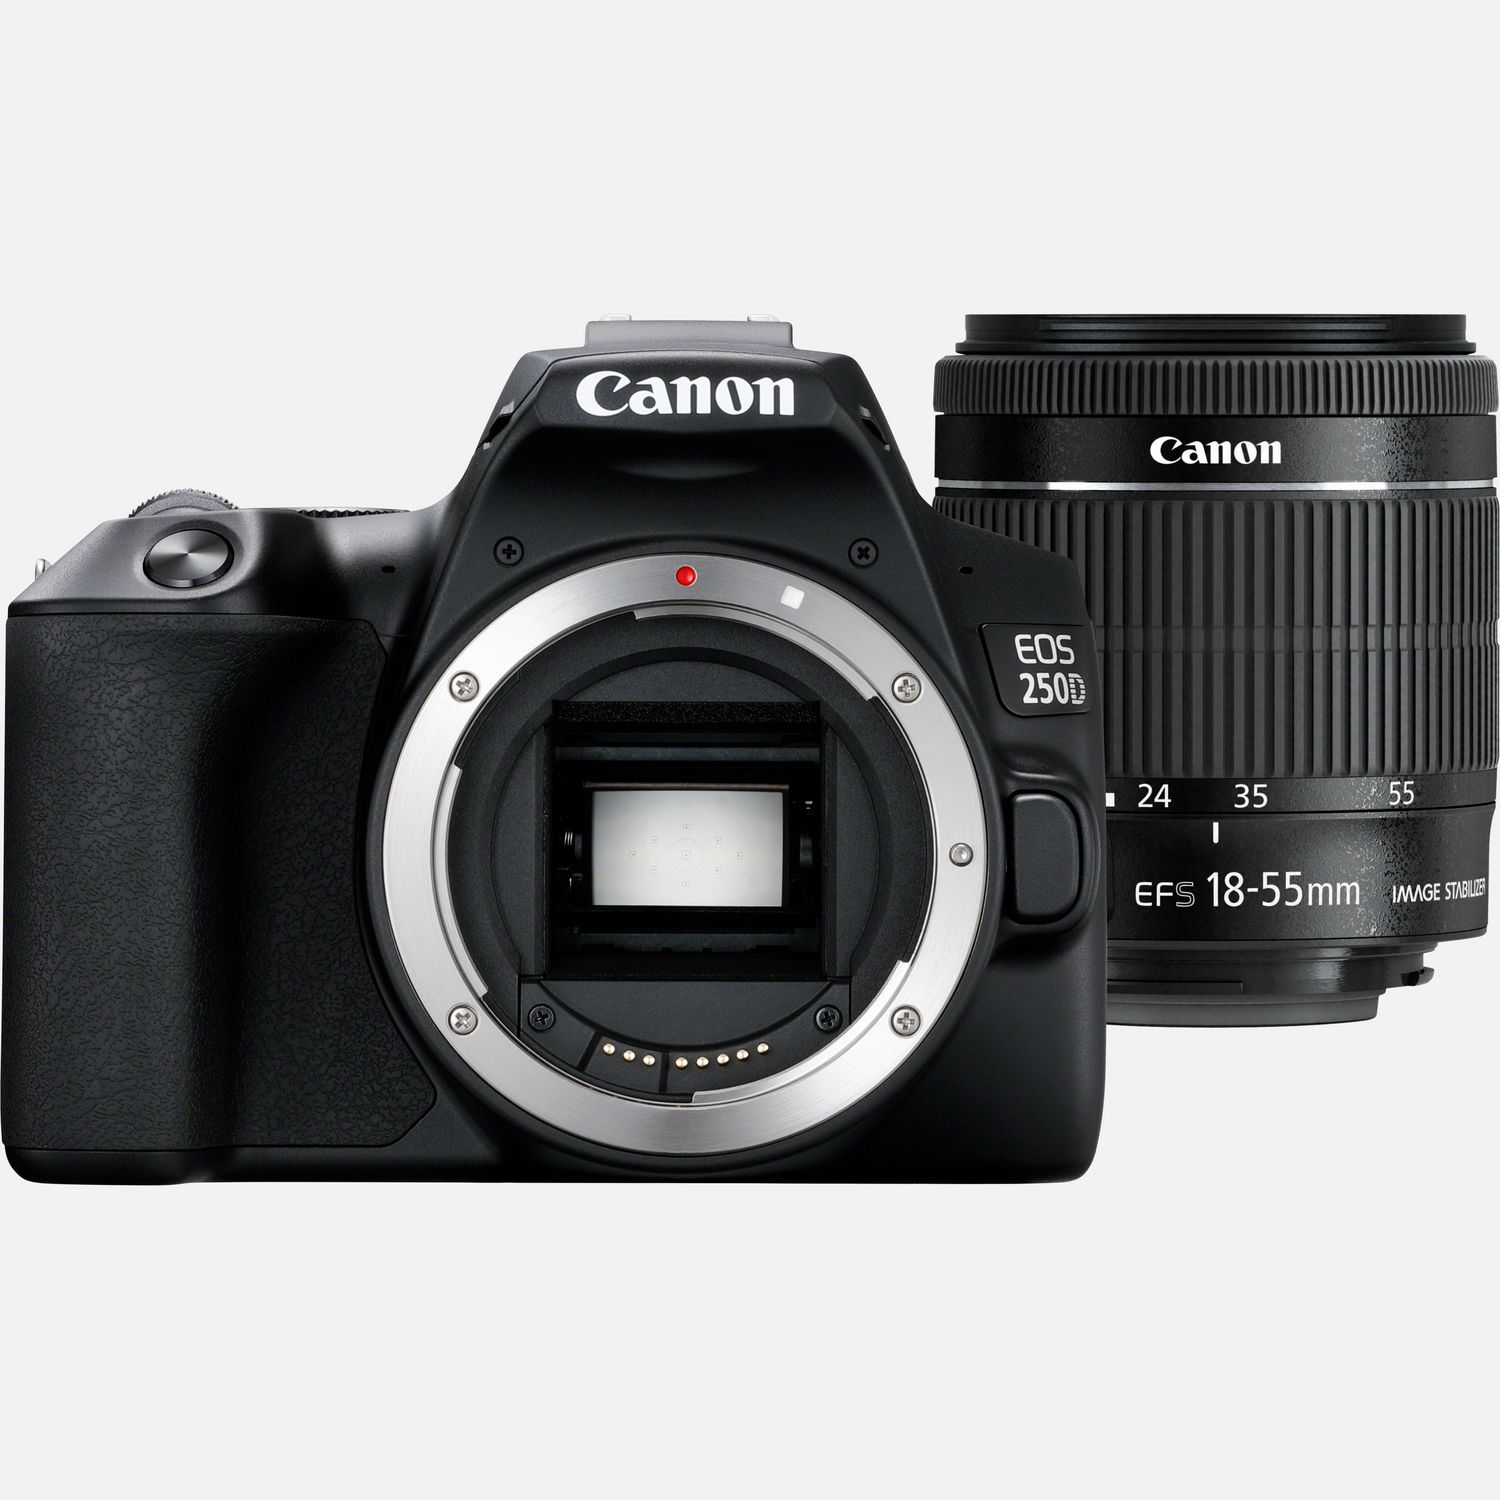 Cameras in Buy EOS Canon STM Black — 18-55mm Wi-Fi Lens IS EF-S Body, + Canon f/4-5.6 250D OY Store